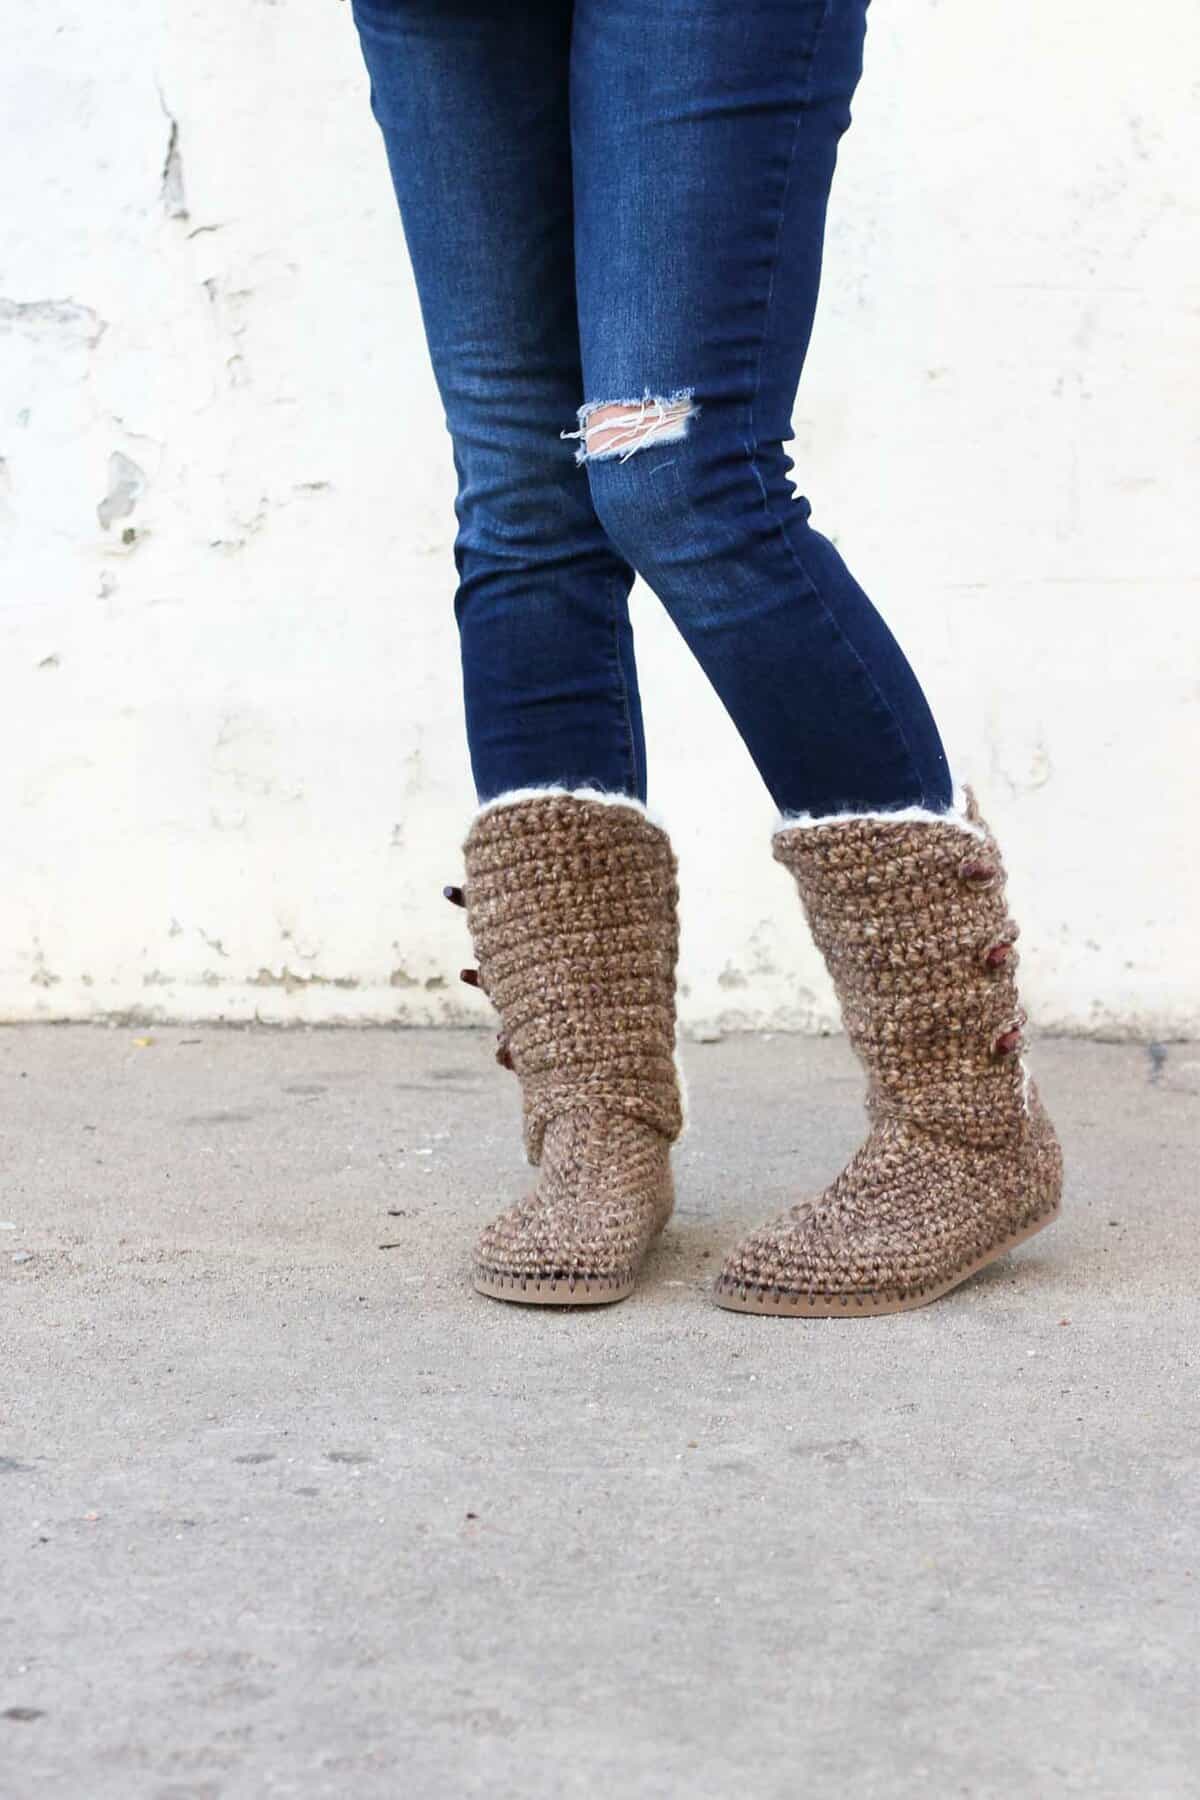 Learn how to make "Breckenridge" Boots with flip flop soles in Part 1 of this free crochet pattern and video tutorial. This adult-sized pattern makes super cozy slippers or even crochet shoes to wear outside. Made with Lion Brand Wool Ease Thick and Quick in "Toffee."